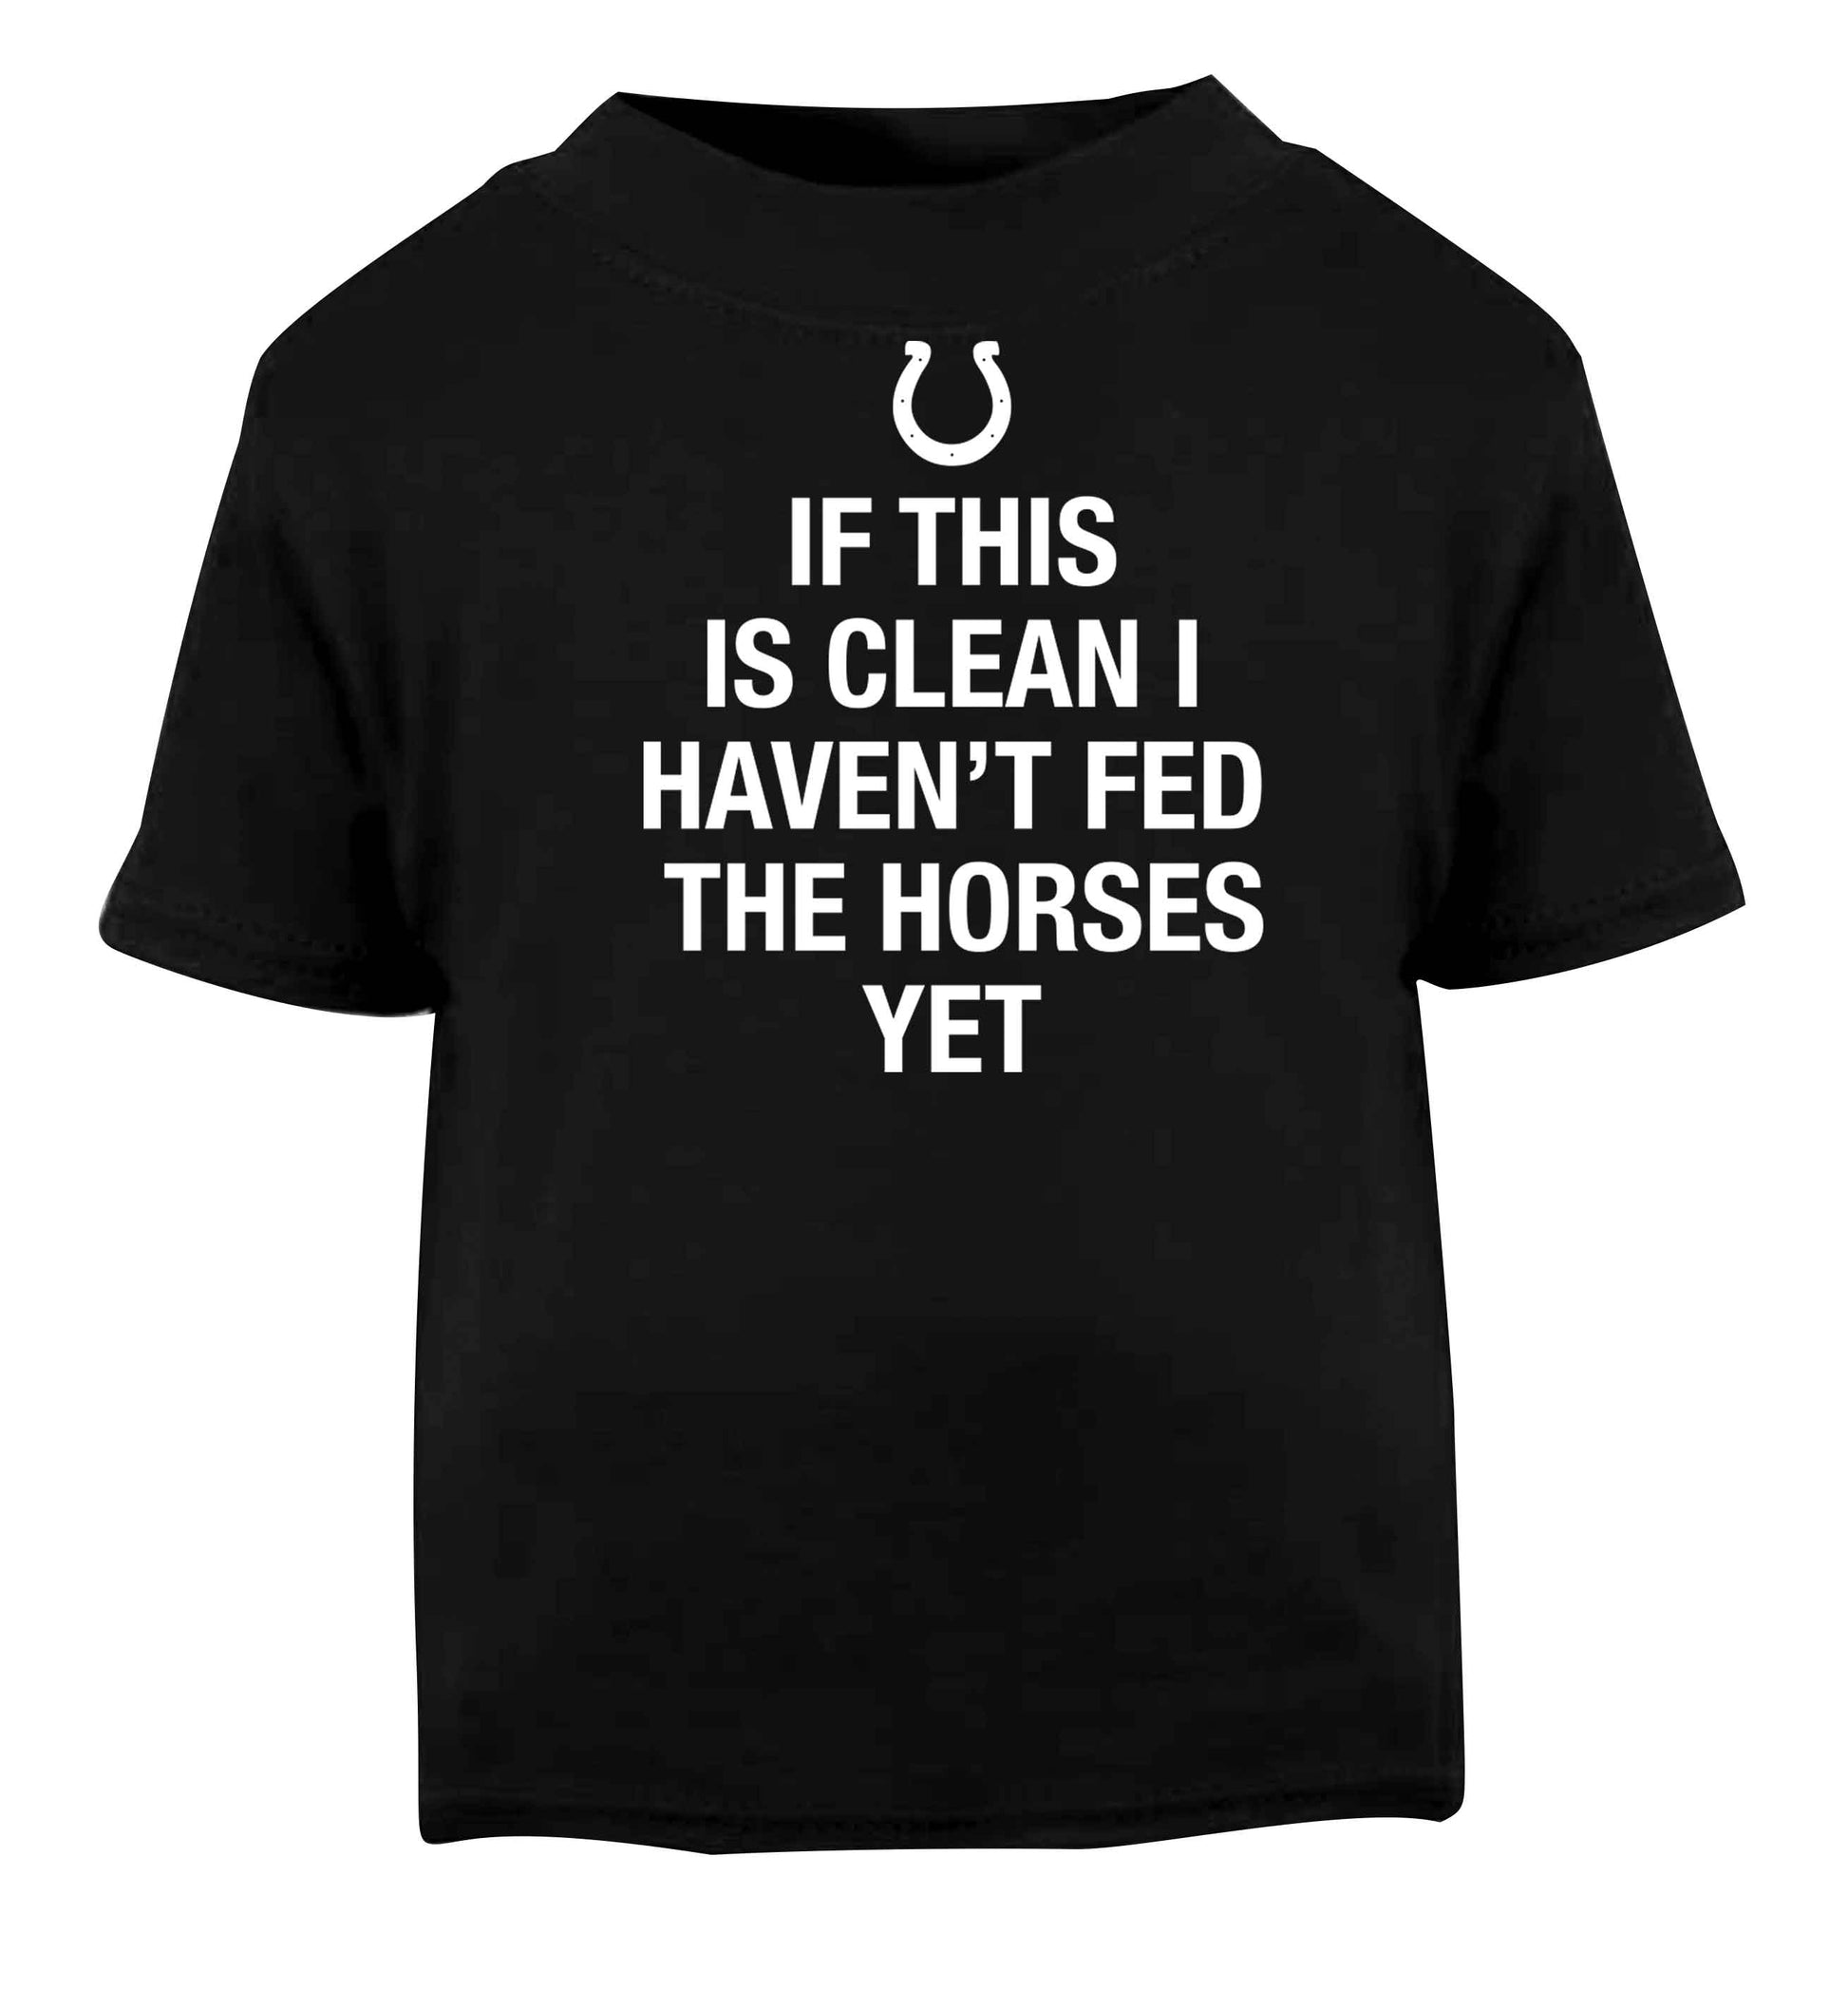 If this isn't clean I haven't fed the horses yet Black baby toddler Tshirt 2 years